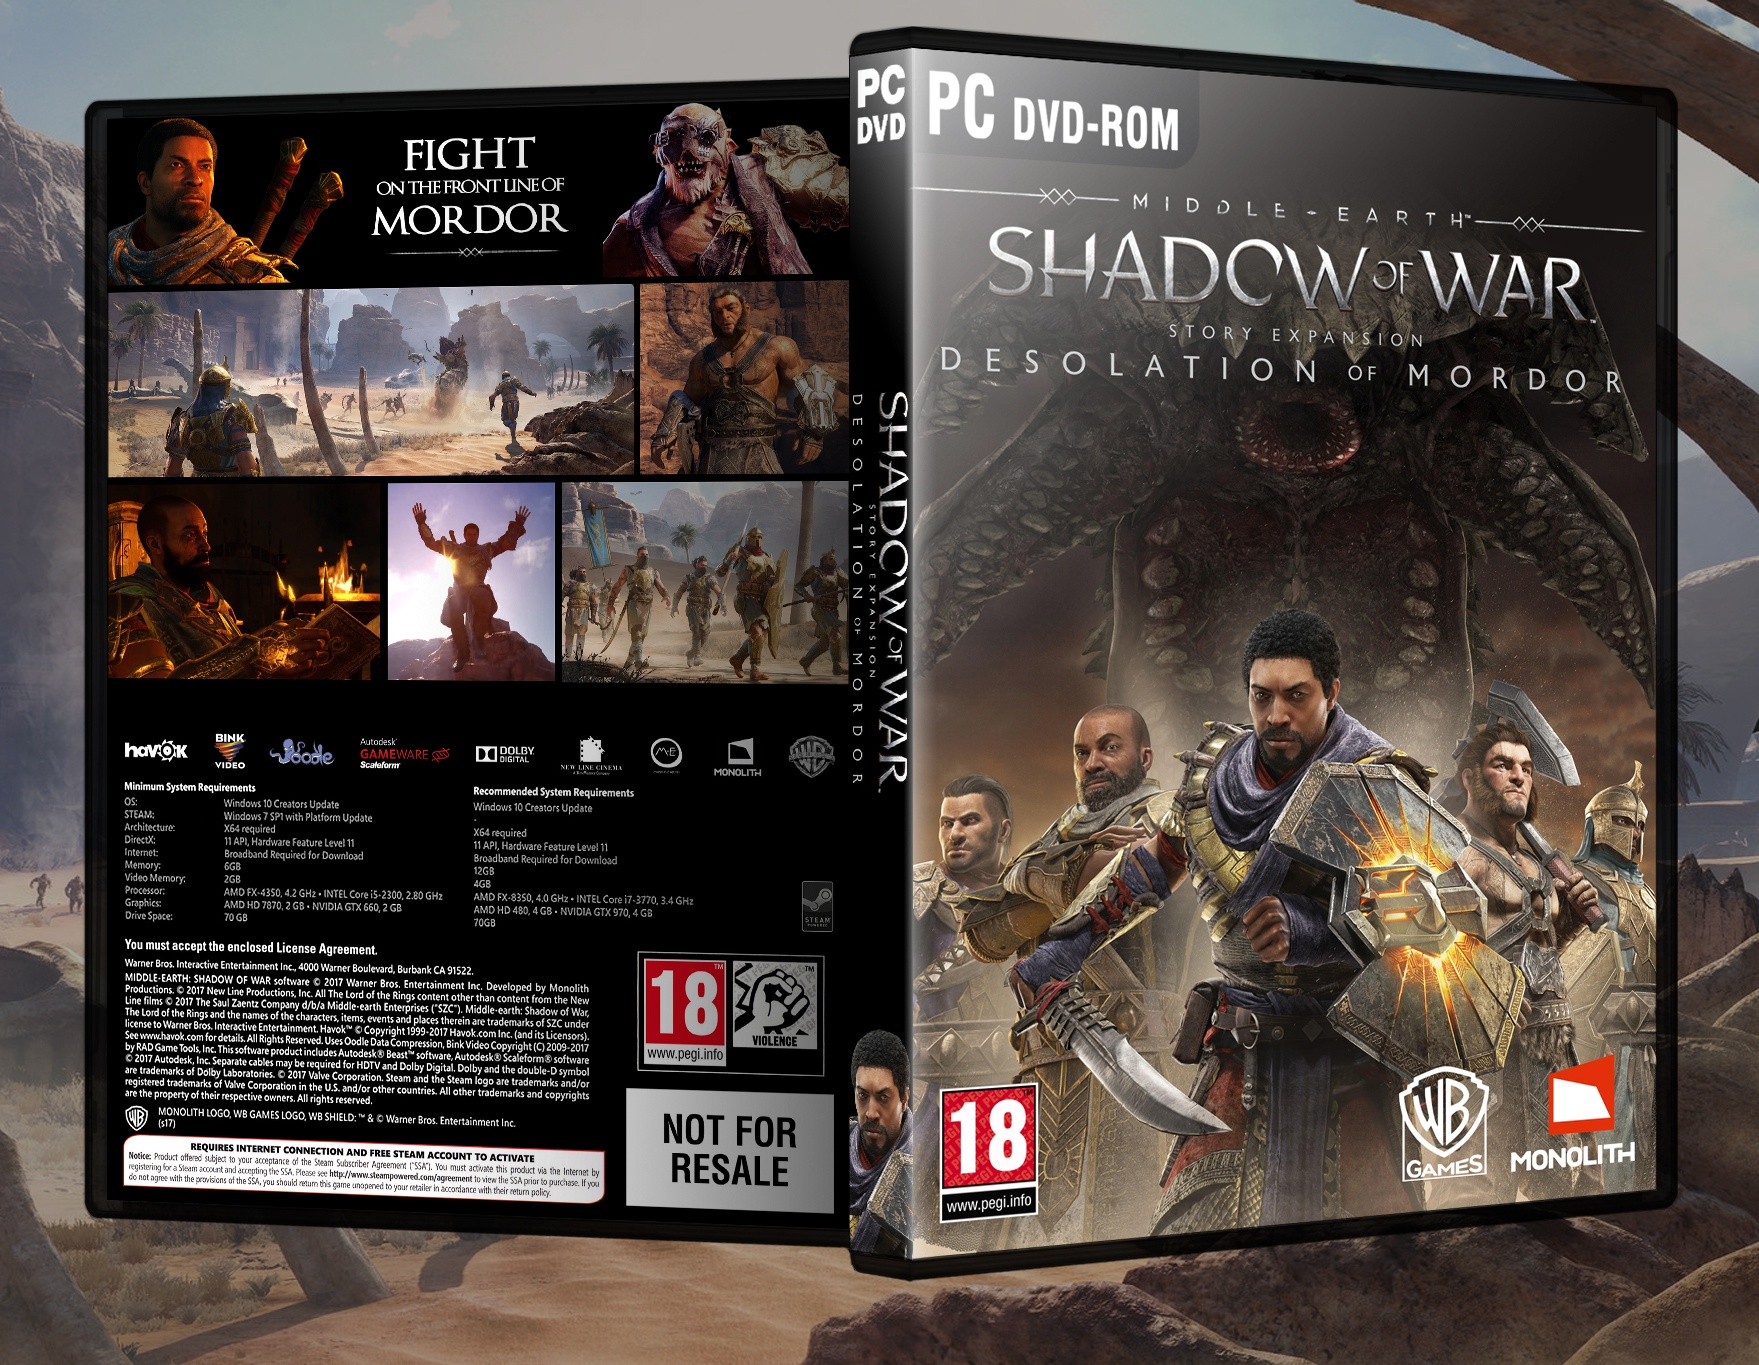 Middle-earth: Shadow of War Desolation Of Mordor box cover